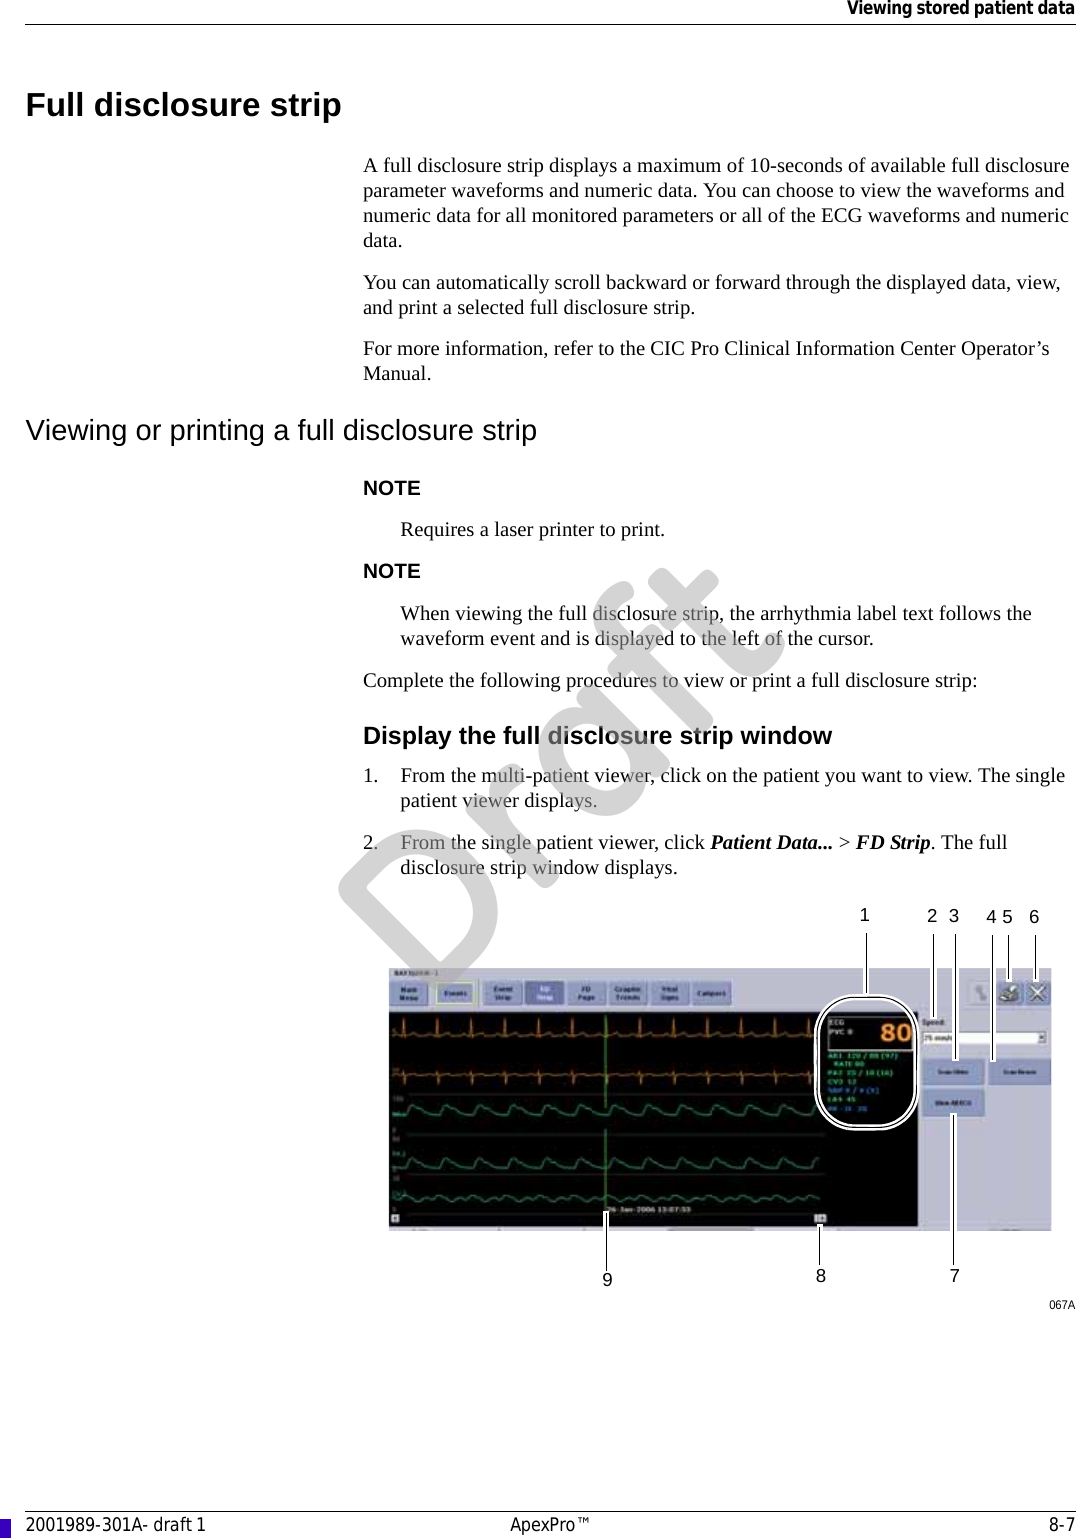 Viewing stored patient data2001989-301A- draft 1 ApexPro™ 8-7Full disclosure stripA full disclosure strip displays a maximum of 10-seconds of available full disclosure parameter waveforms and numeric data. You can choose to view the waveforms and numeric data for all monitored parameters or all of the ECG waveforms and numeric data. You can automatically scroll backward or forward through the displayed data, view, and print a selected full disclosure strip. For more information, refer to the CIC Pro Clinical Information Center Operator’s Manual.Viewing or printing a full disclosure stripNOTERequires a laser printer to print.NOTEWhen viewing the full disclosure strip, the arrhythmia label text follows the waveform event and is displayed to the left of the cursor.Complete the following procedures to view or print a full disclosure strip:Display the full disclosure strip window1. From the multi-patient viewer, click on the patient you want to view. The single patient viewer displays. 2. From the single patient viewer, click Patient Data... &gt; FD Strip. The full disclosure strip window displays.067A8195 62347Draft